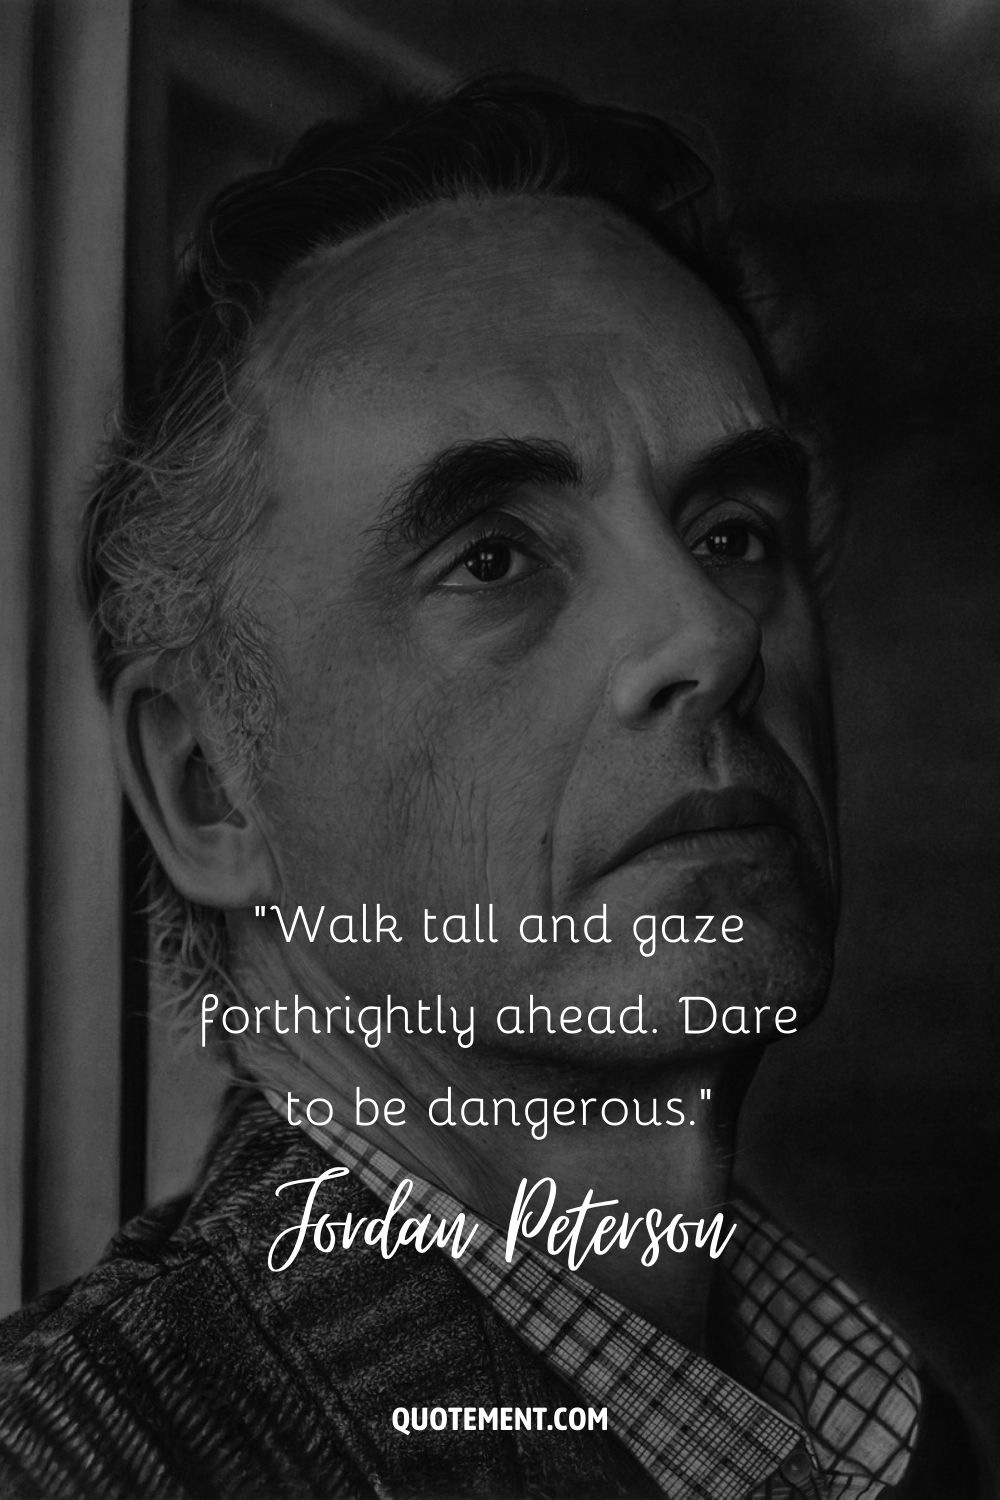 Walk tall and gaze forthrightly ahead. Dare to be dangerous